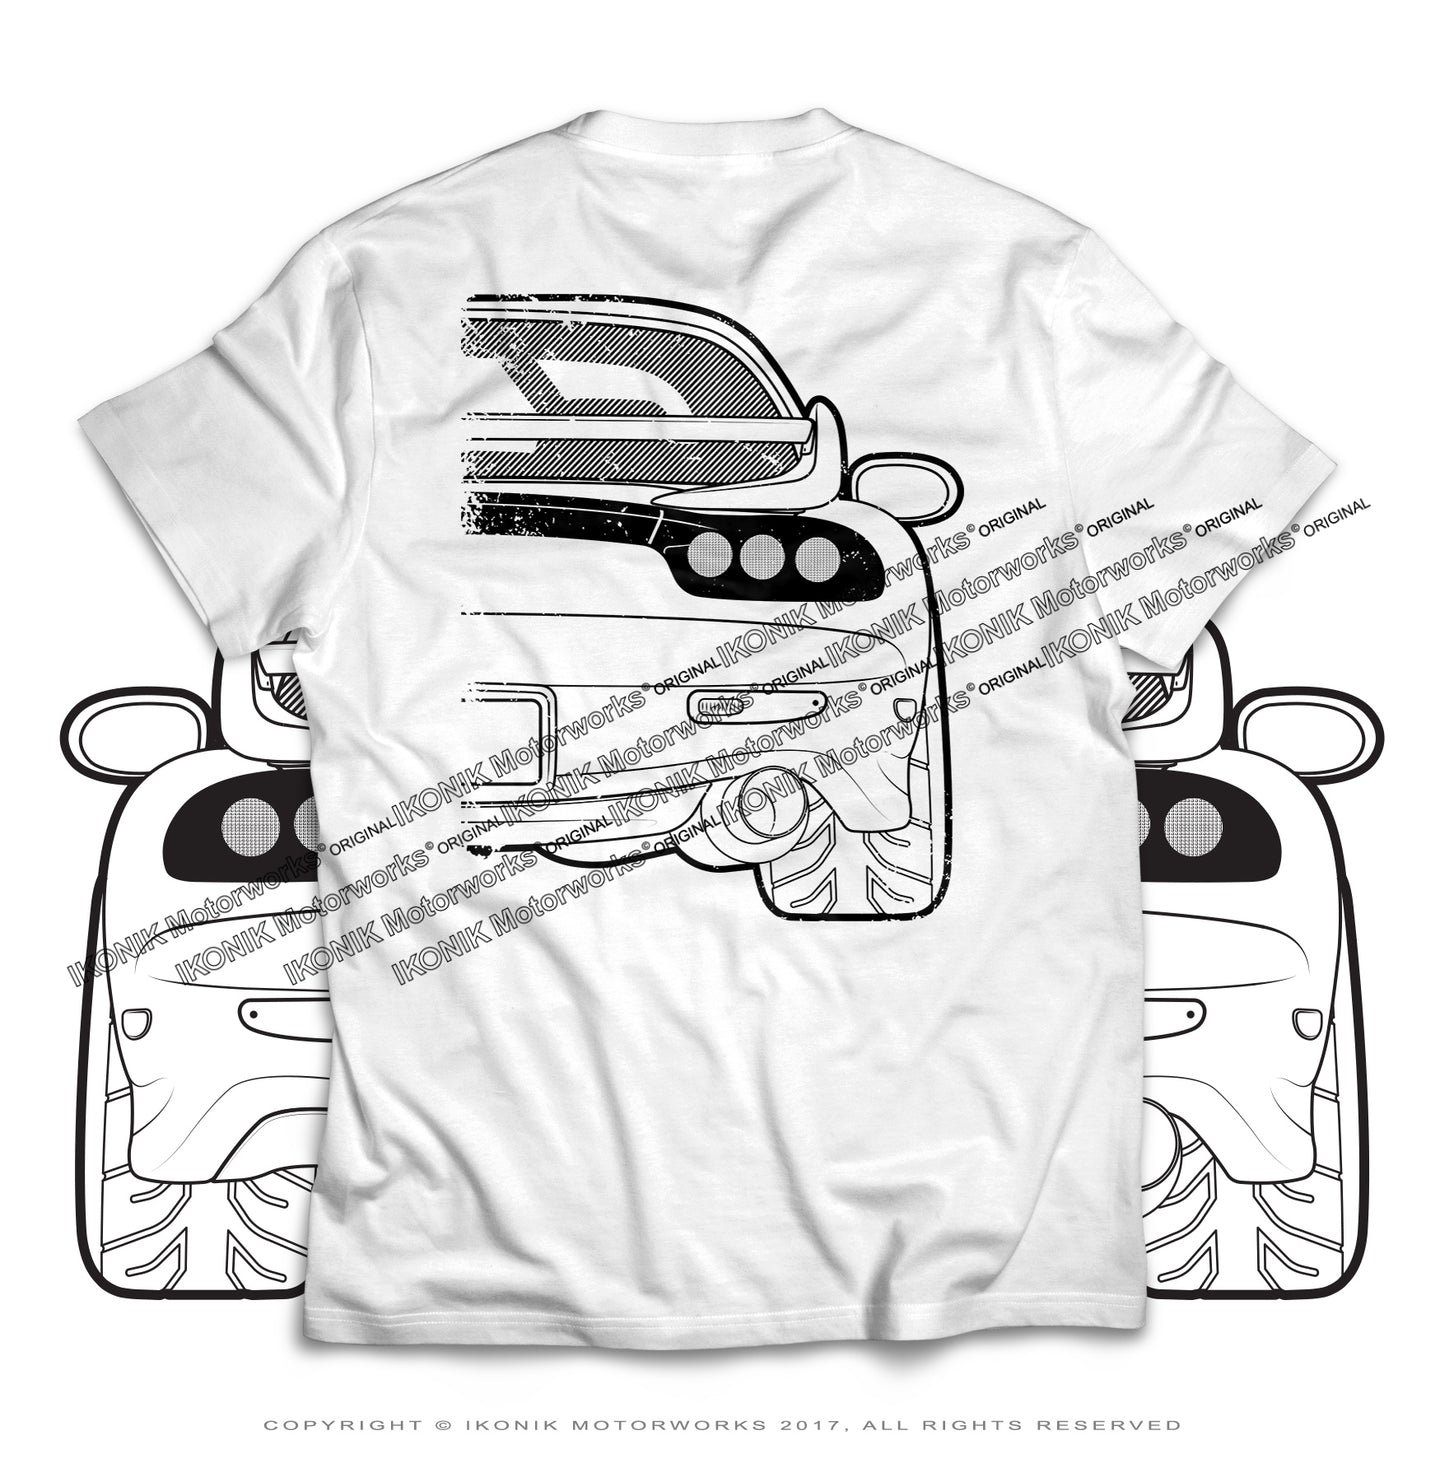 Mazda Rotary RX-7 99 Spec Front and Back Tee